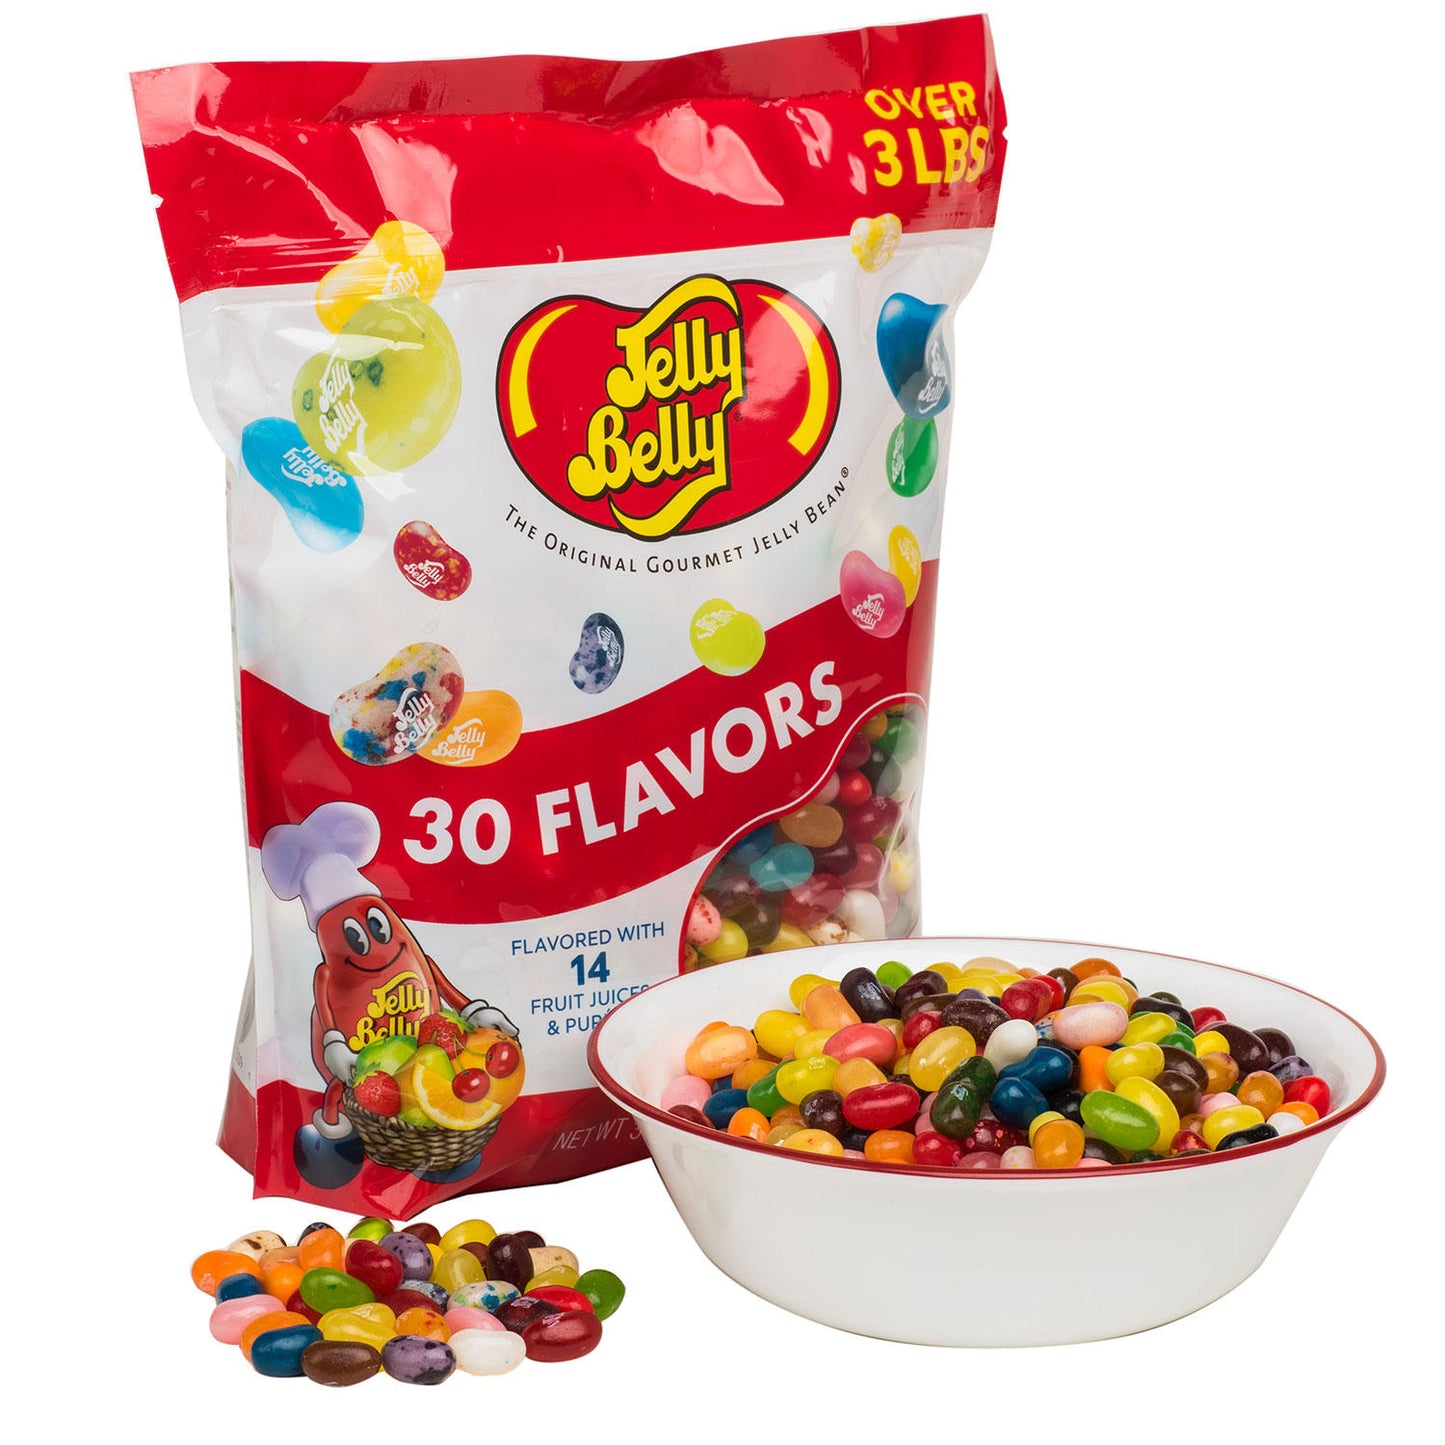 Jelly Belly Gourmet Jelly Beans 30 Flavors (51 oz.)